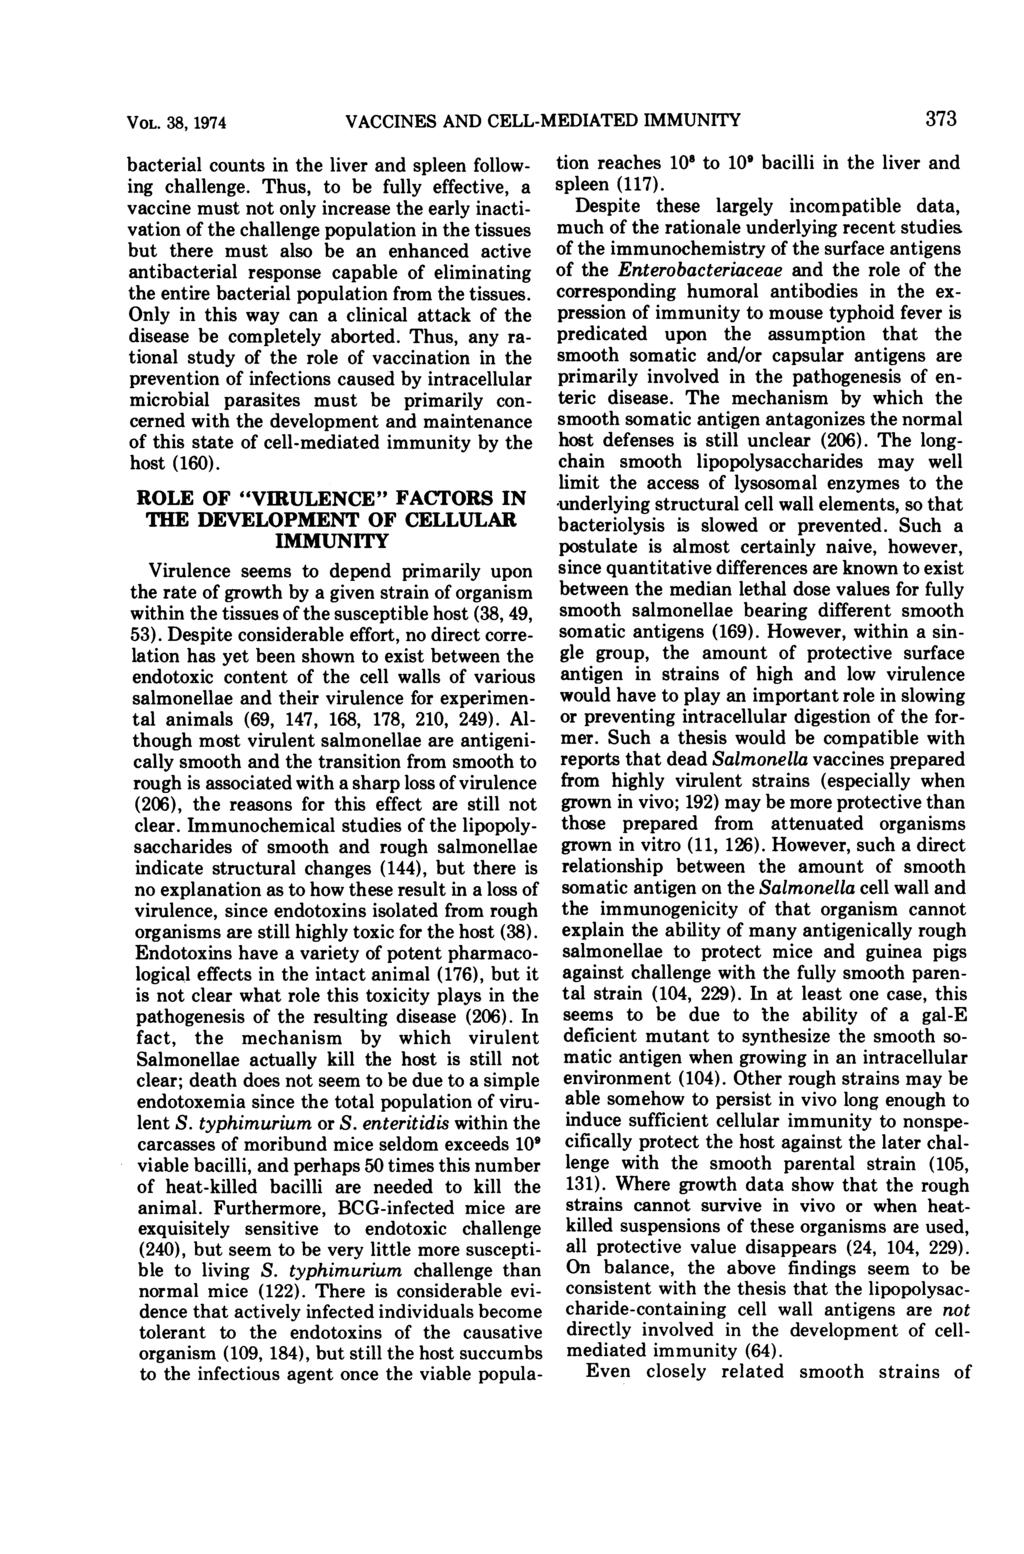 VOL. 38, 1974 VACCINES AND CELL-MEDIATED IMMUNITY bacterial counts in the liver and spleen following challenge.